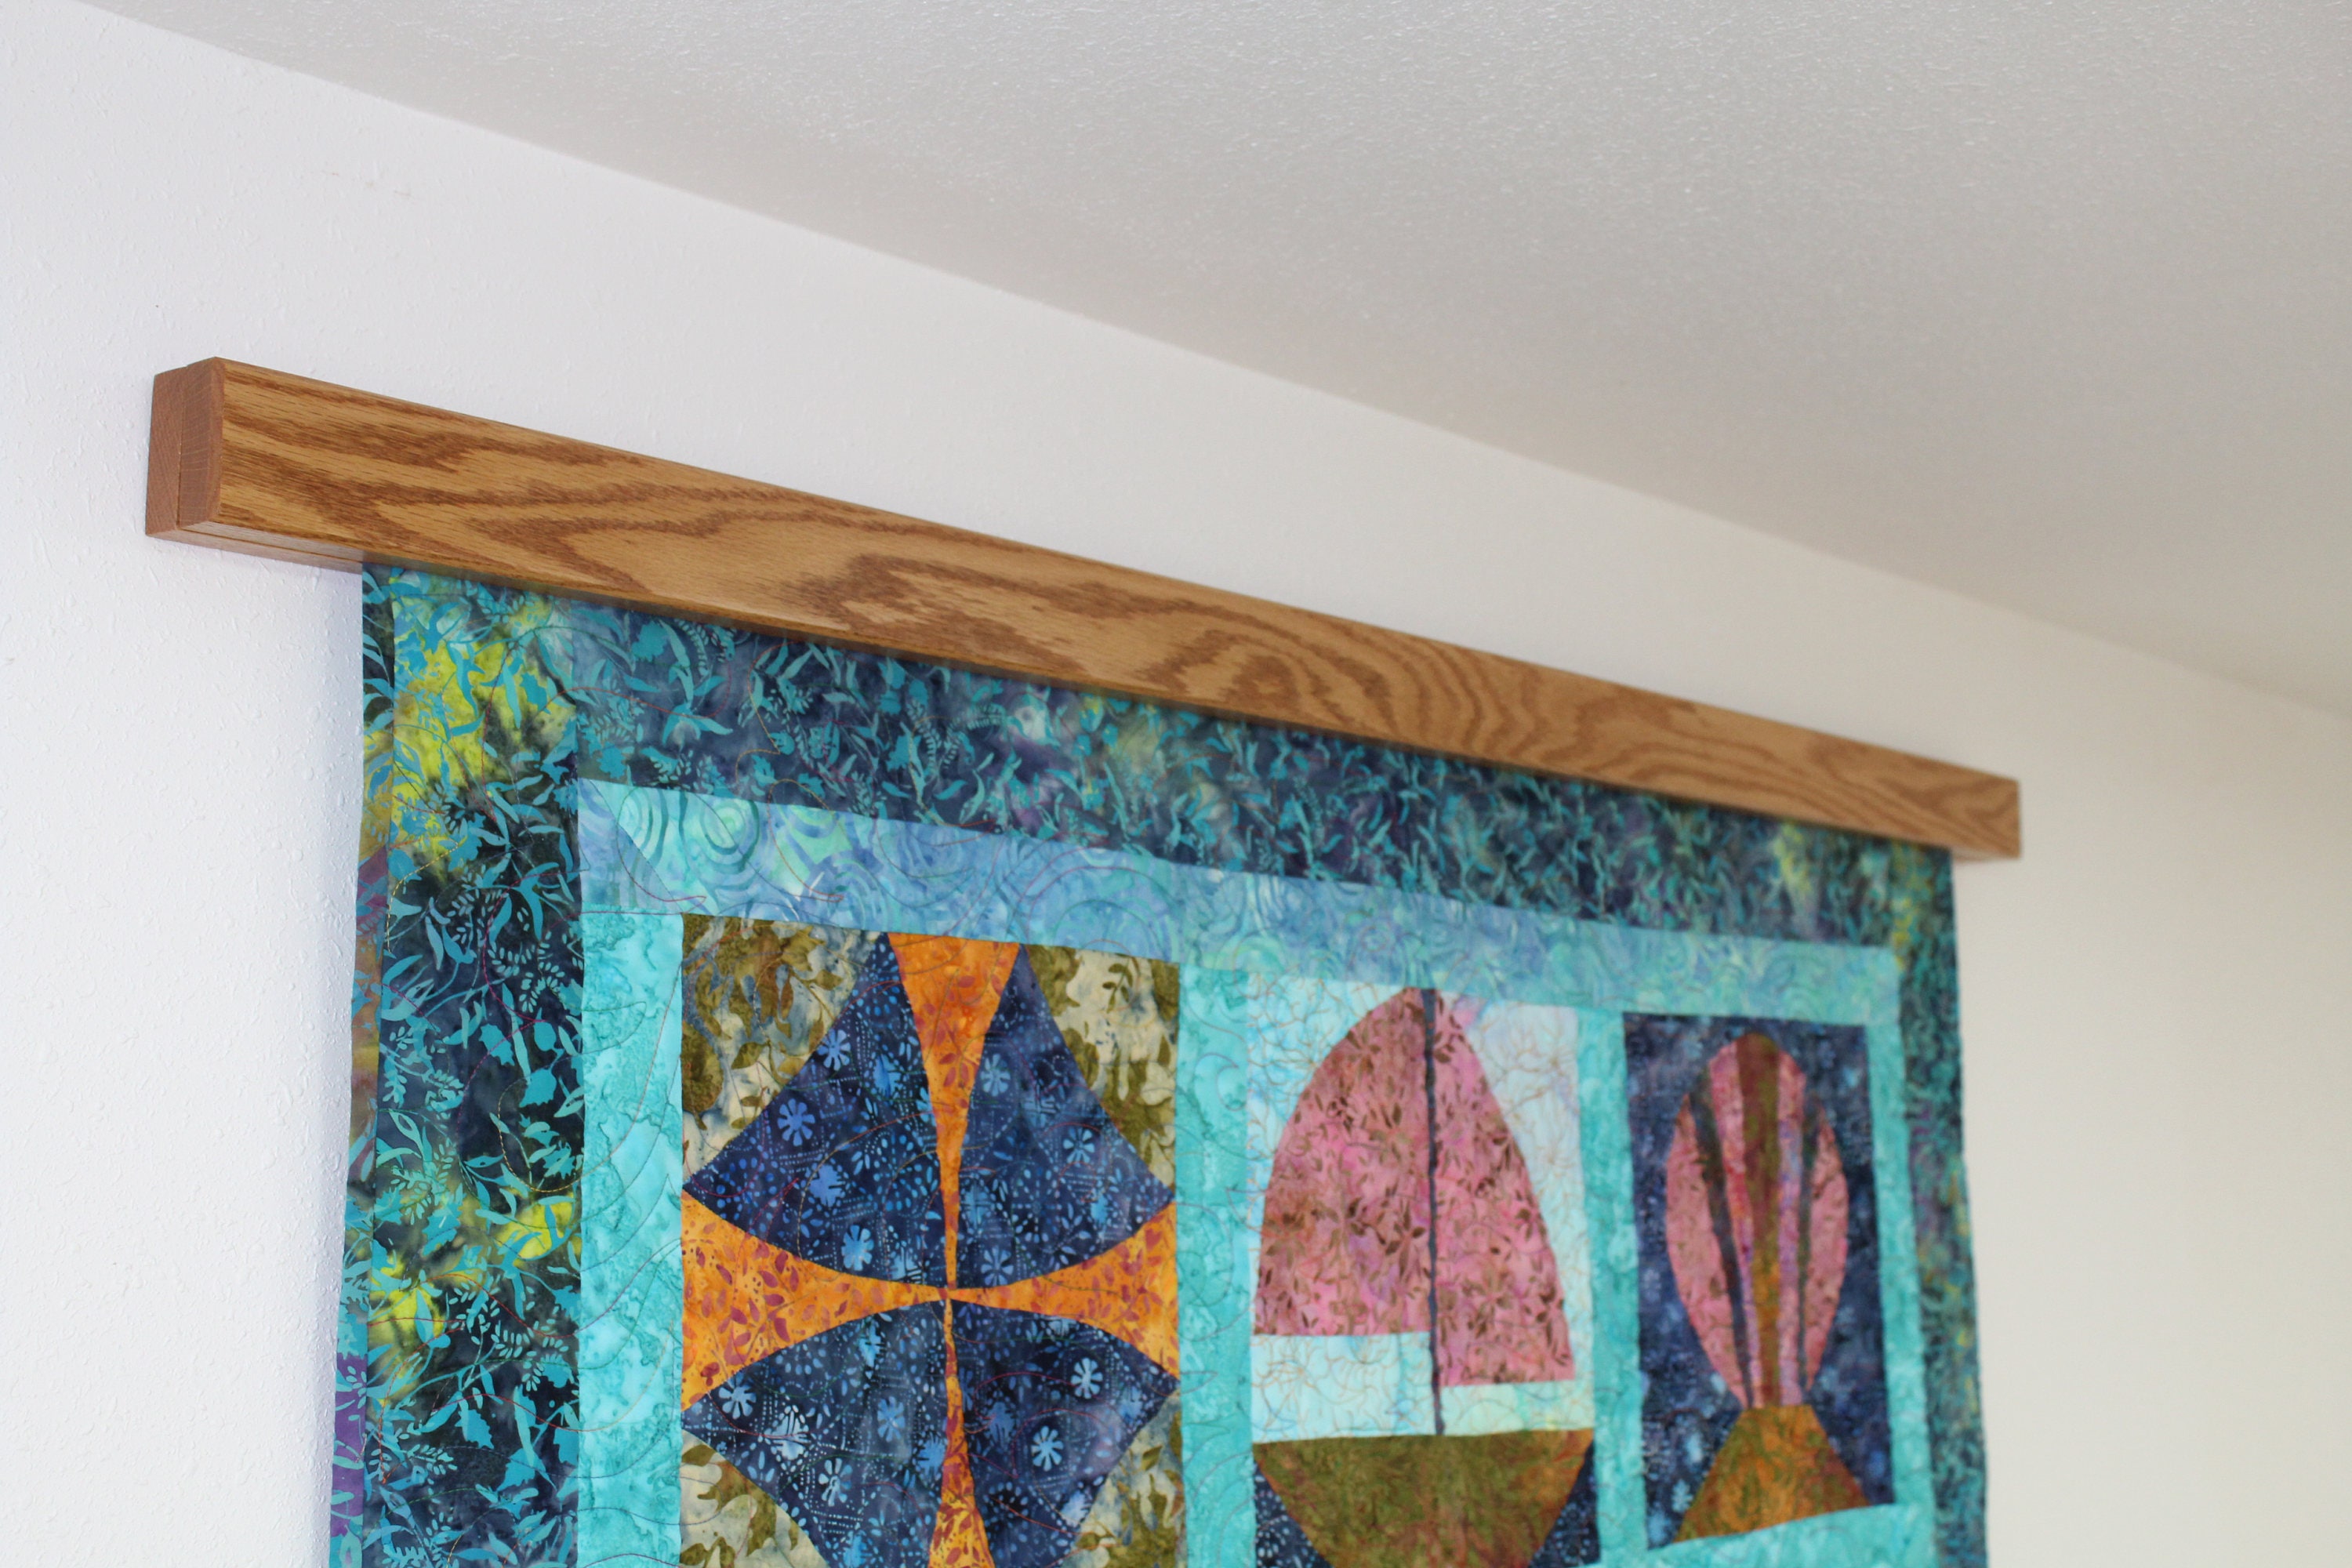 Invisible Quilt Hangers for Walls - Quilt Hanging Solutions by The